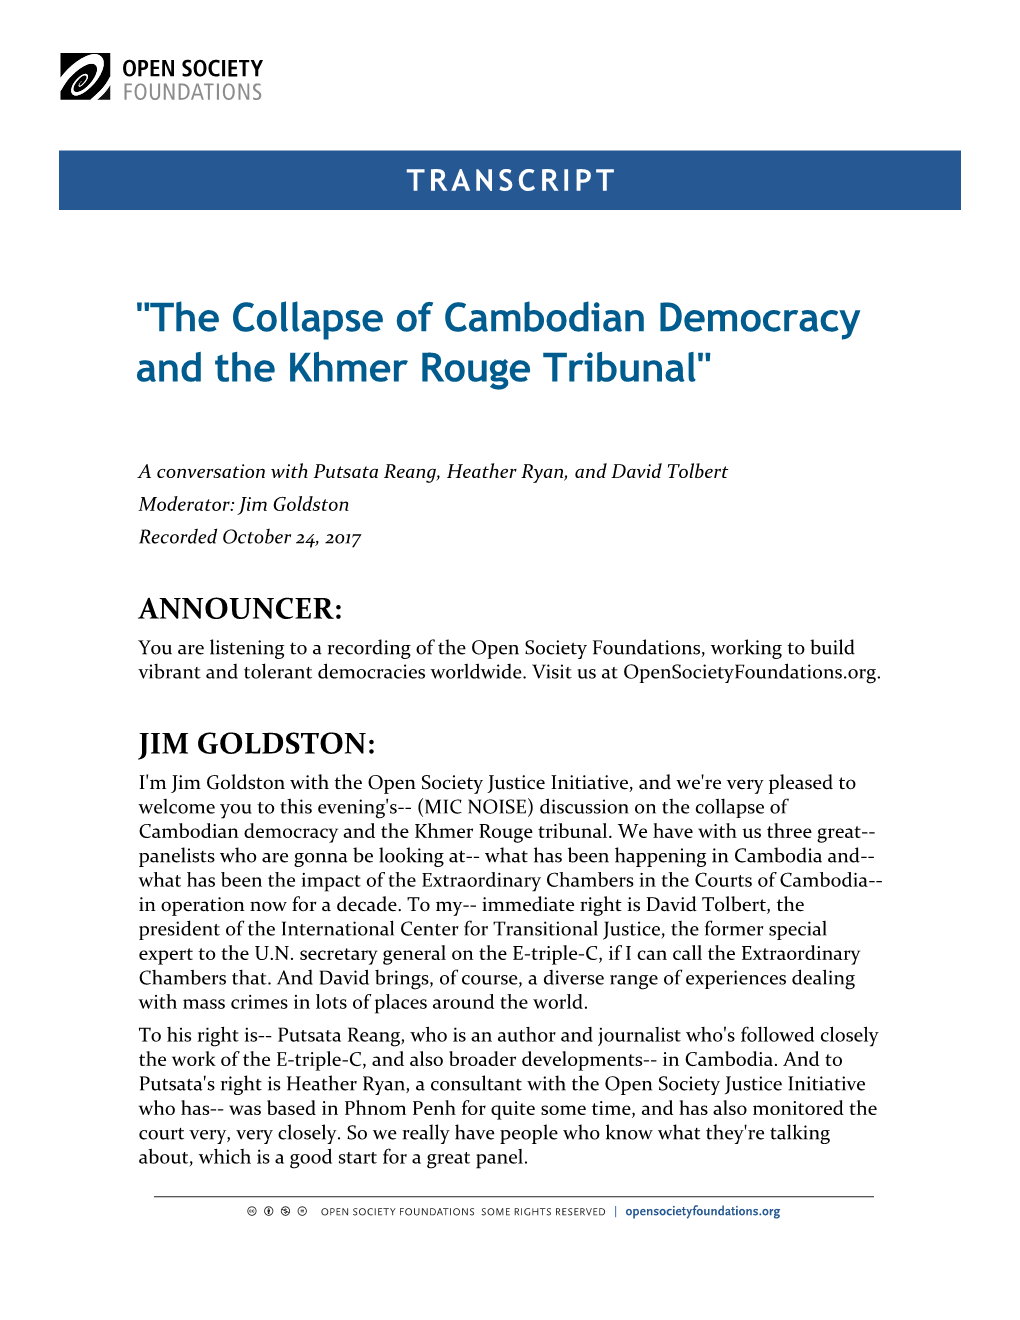 "The Collapse of Cambodian Democracy and the Khmer Rouge Tribunal"